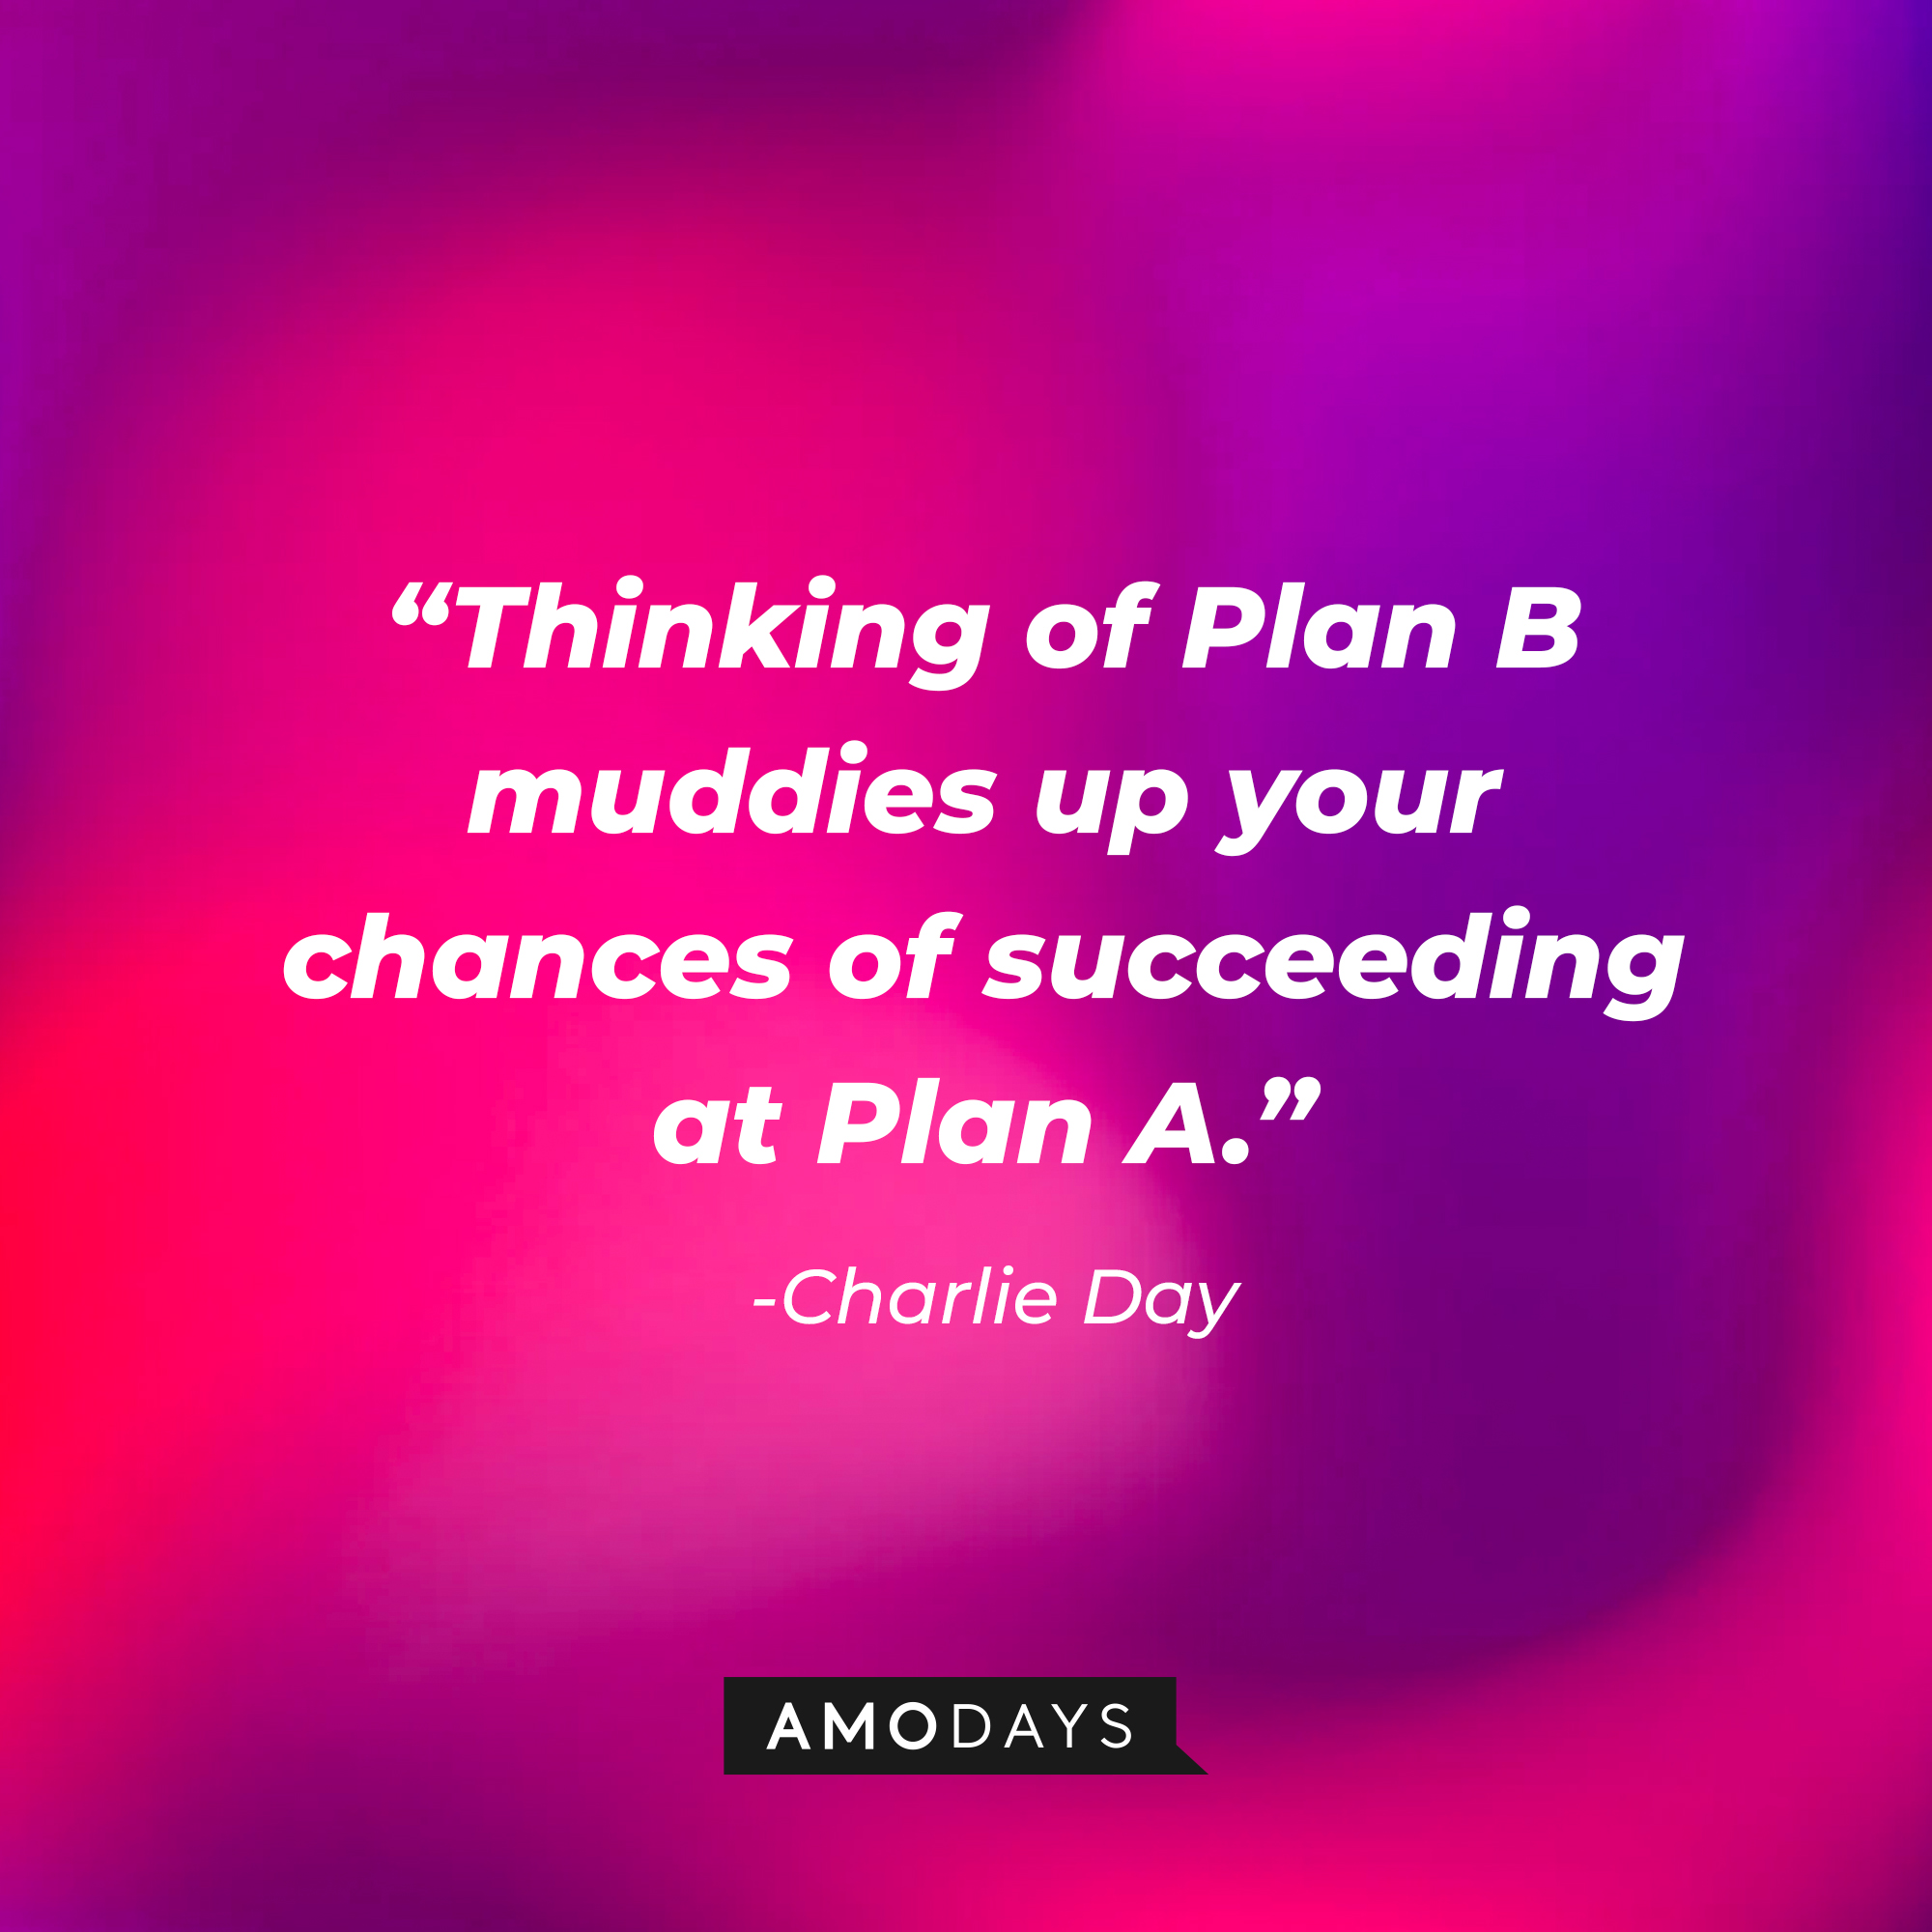 Charlie Day’s quote: “Thinking of Plan B muddies up your chances of succeeding at Plan A.” | Source: AmoDays